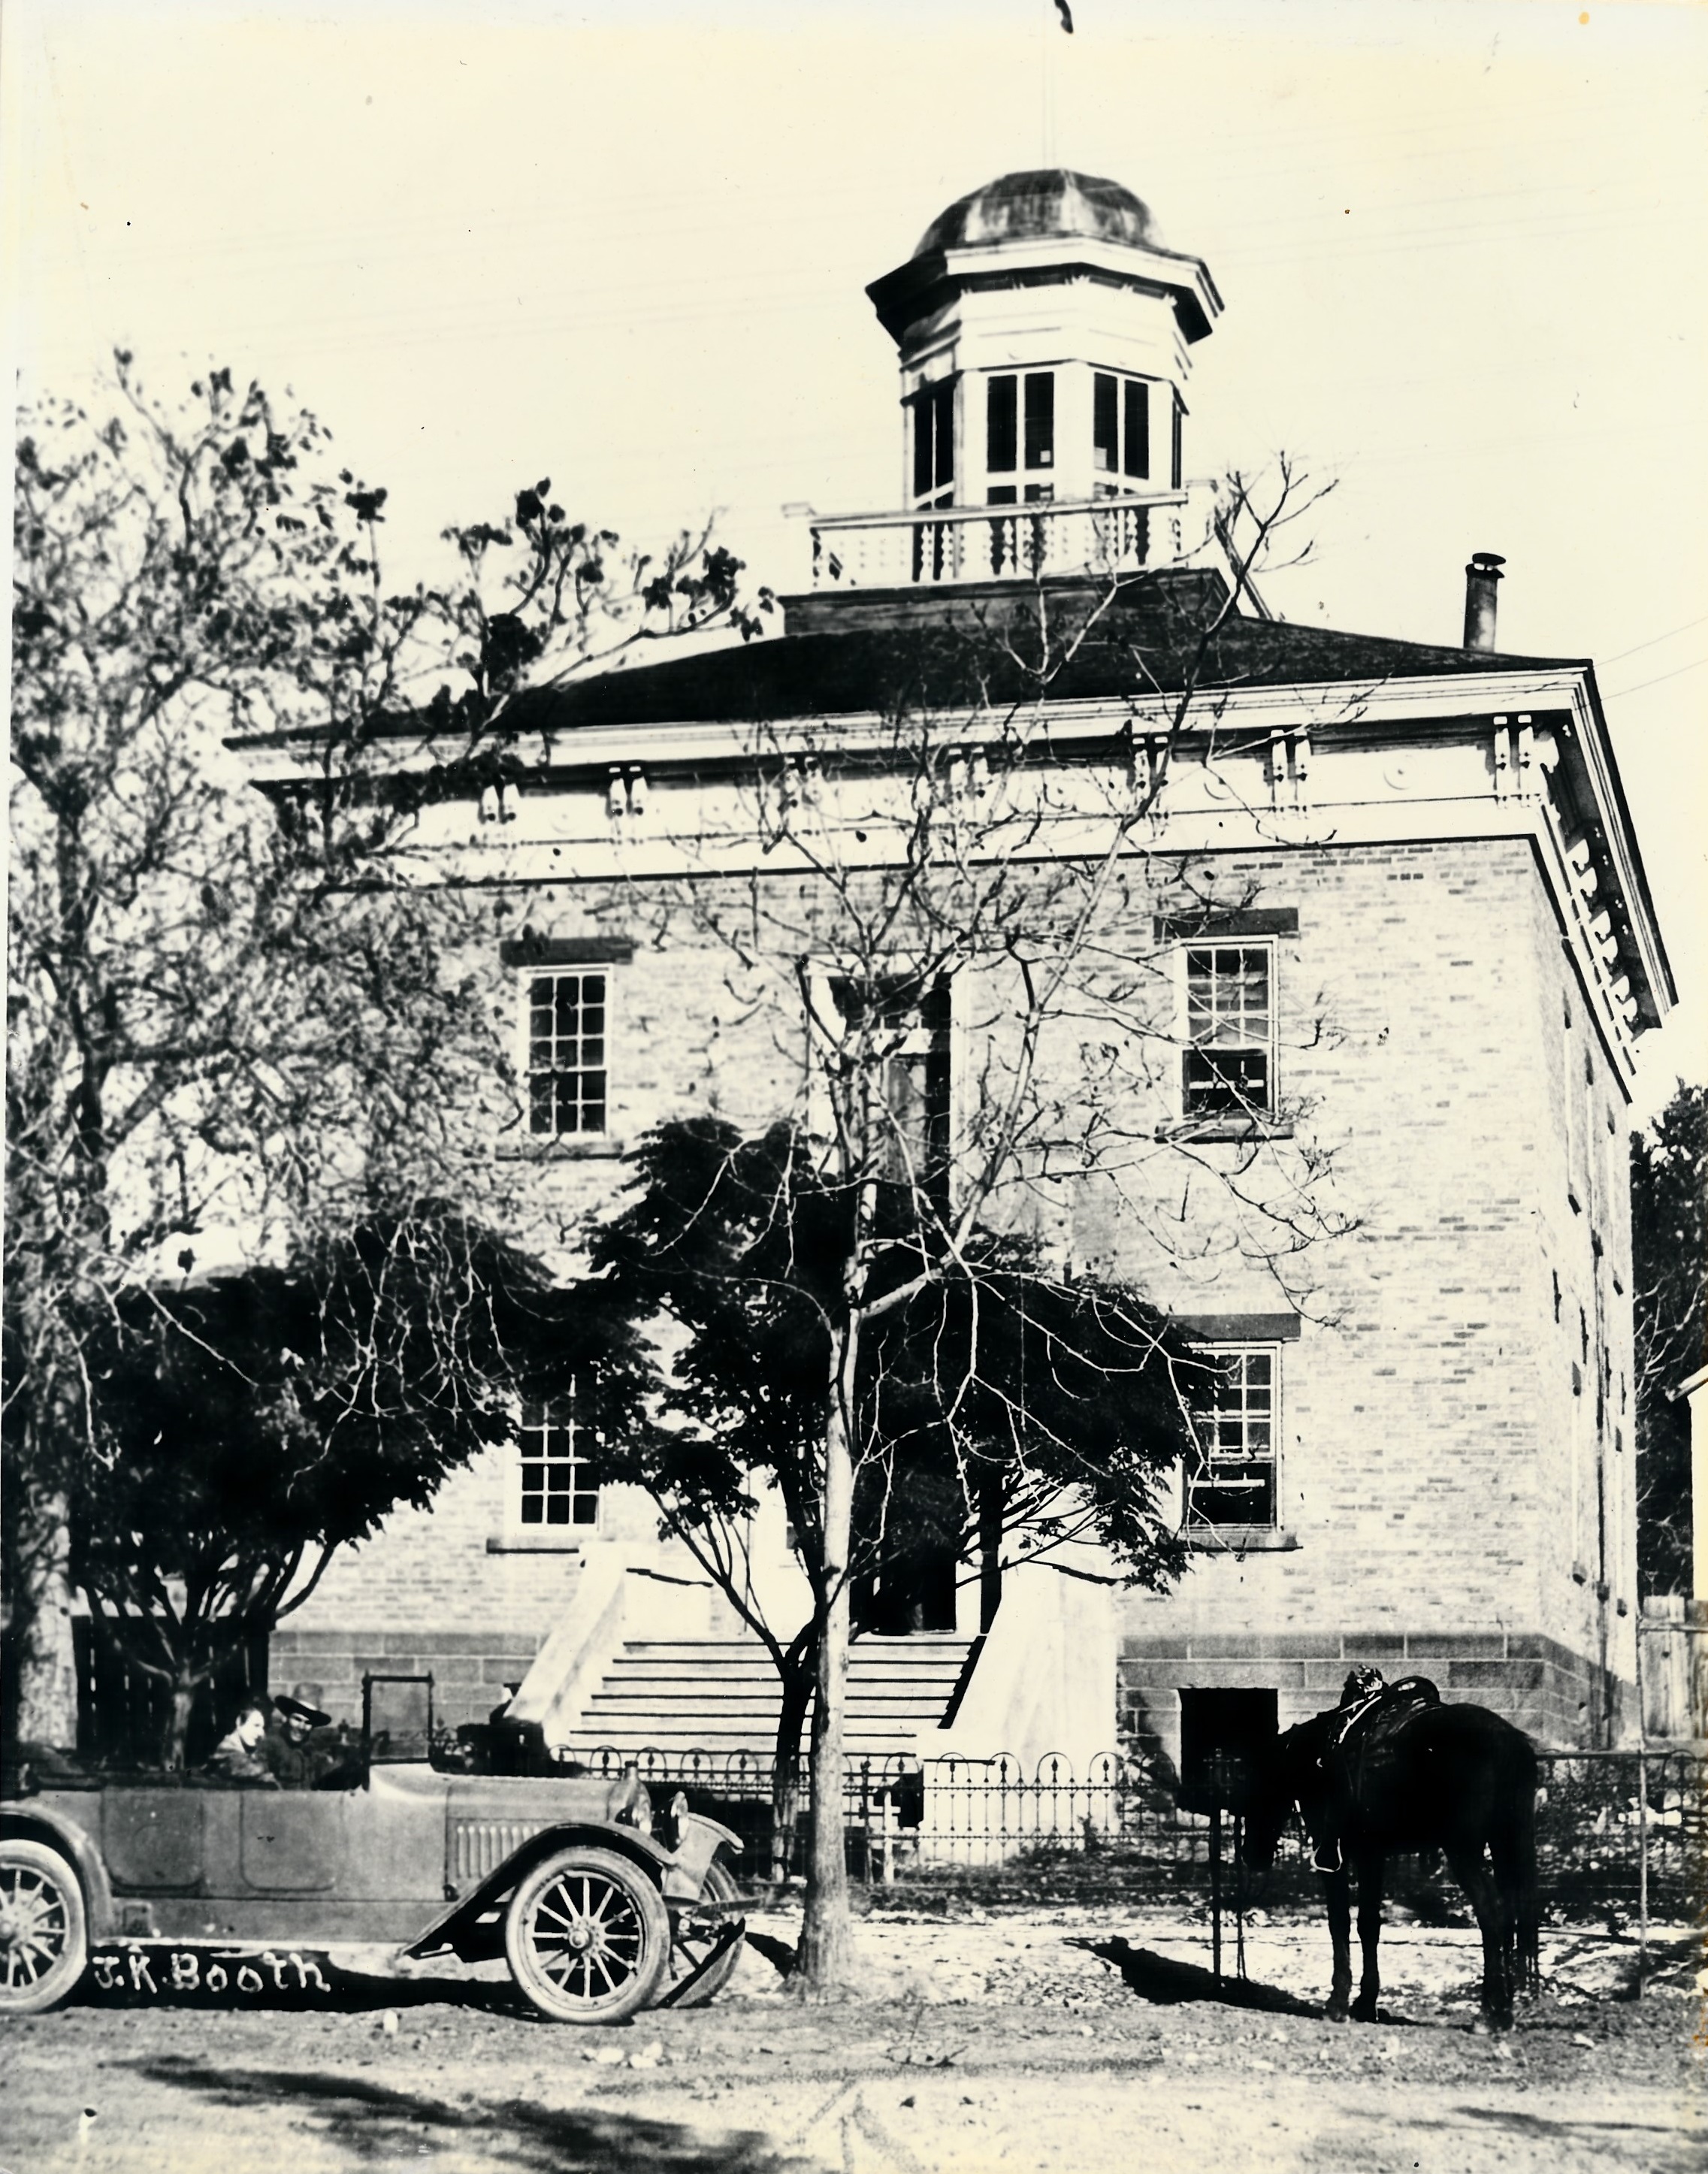 A car and horse in front of the old Washington County Courthouse